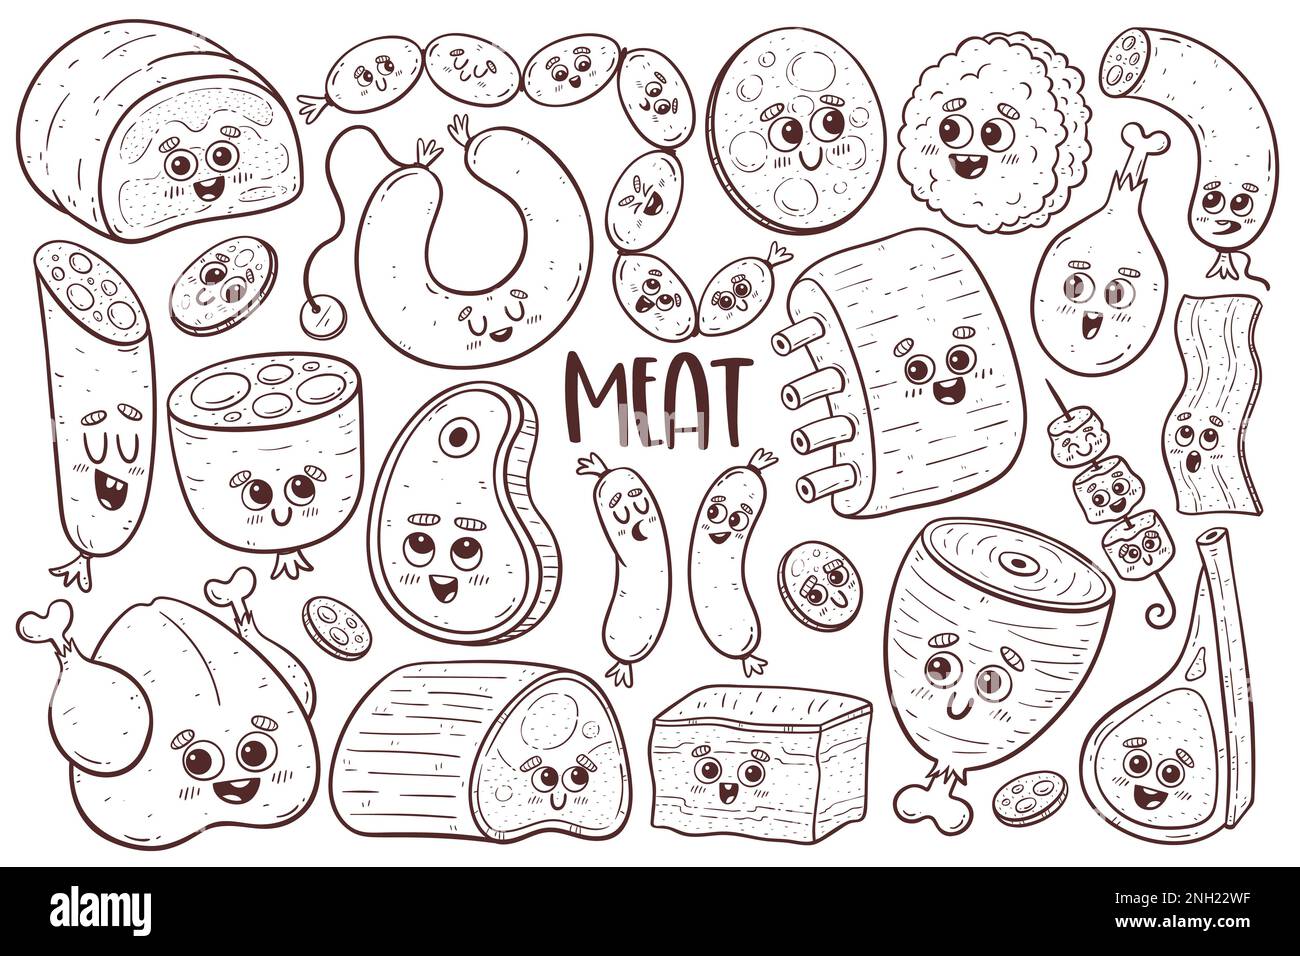 Cute meat collection with cartoon faces. Isolated doodle cliparts. Coloring illustration page. Stock Photo